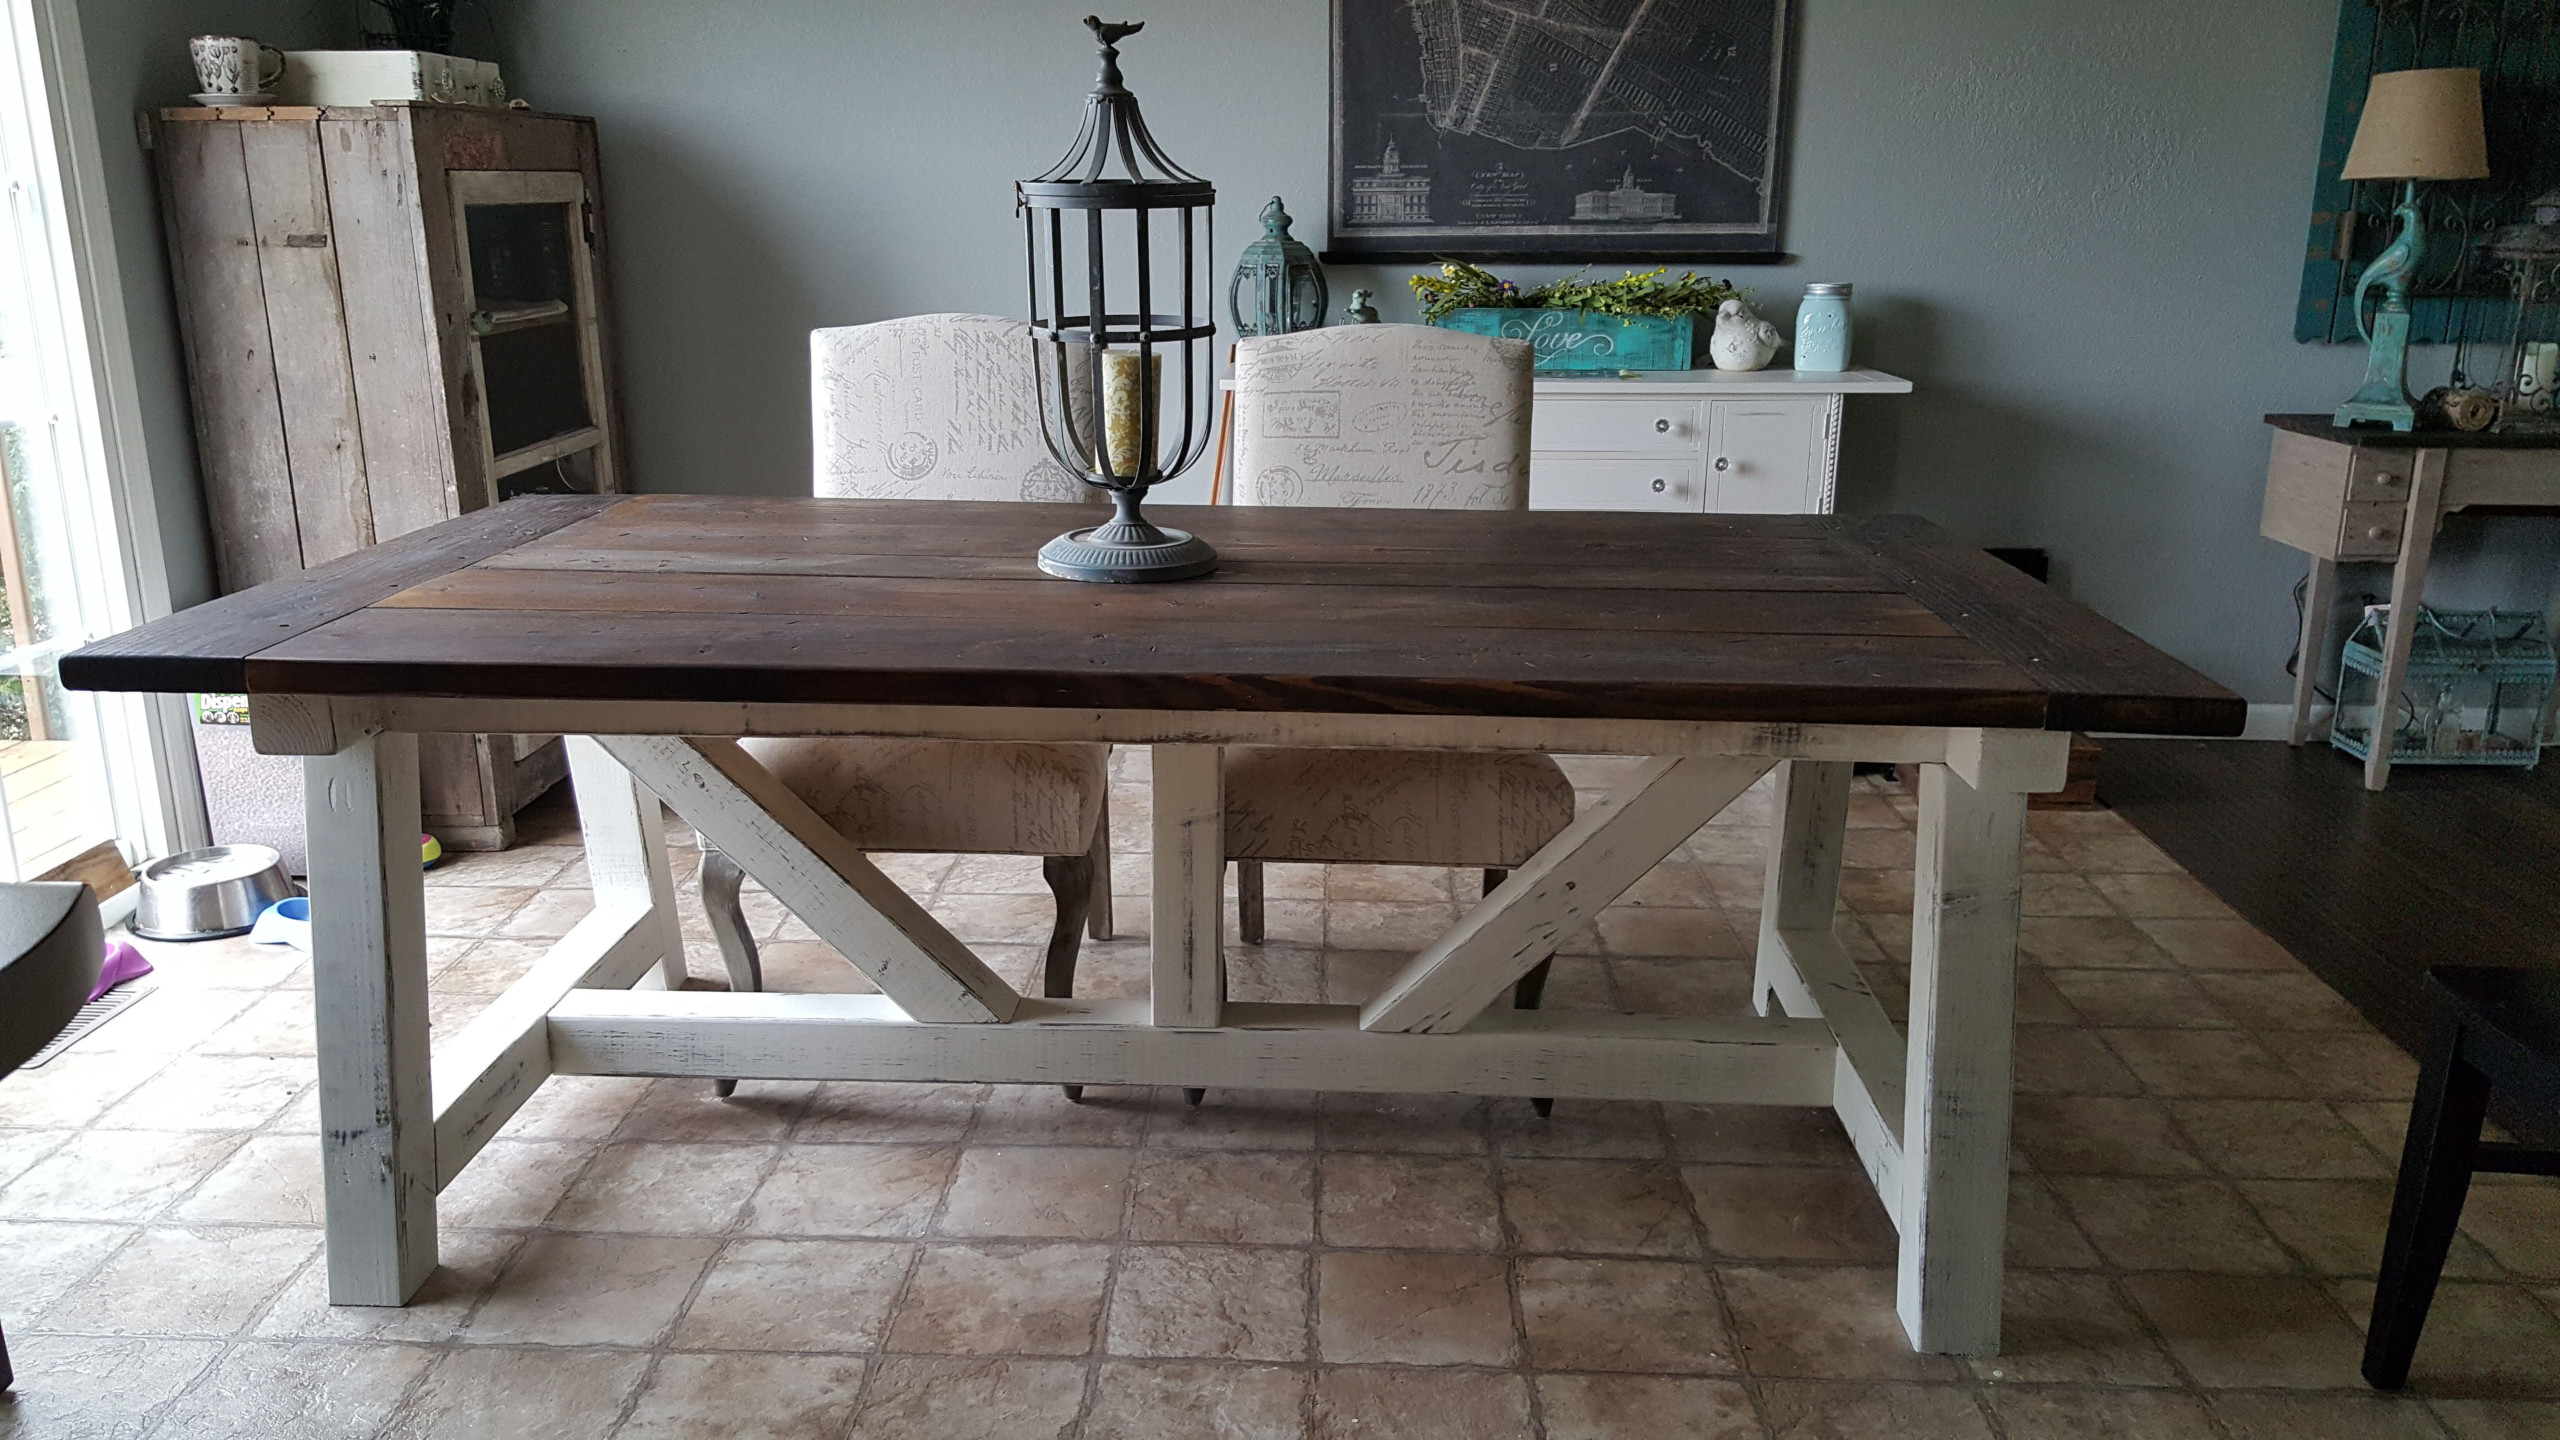 4x6 Truss Beam Farm Table Do It Yourself Home Projects 